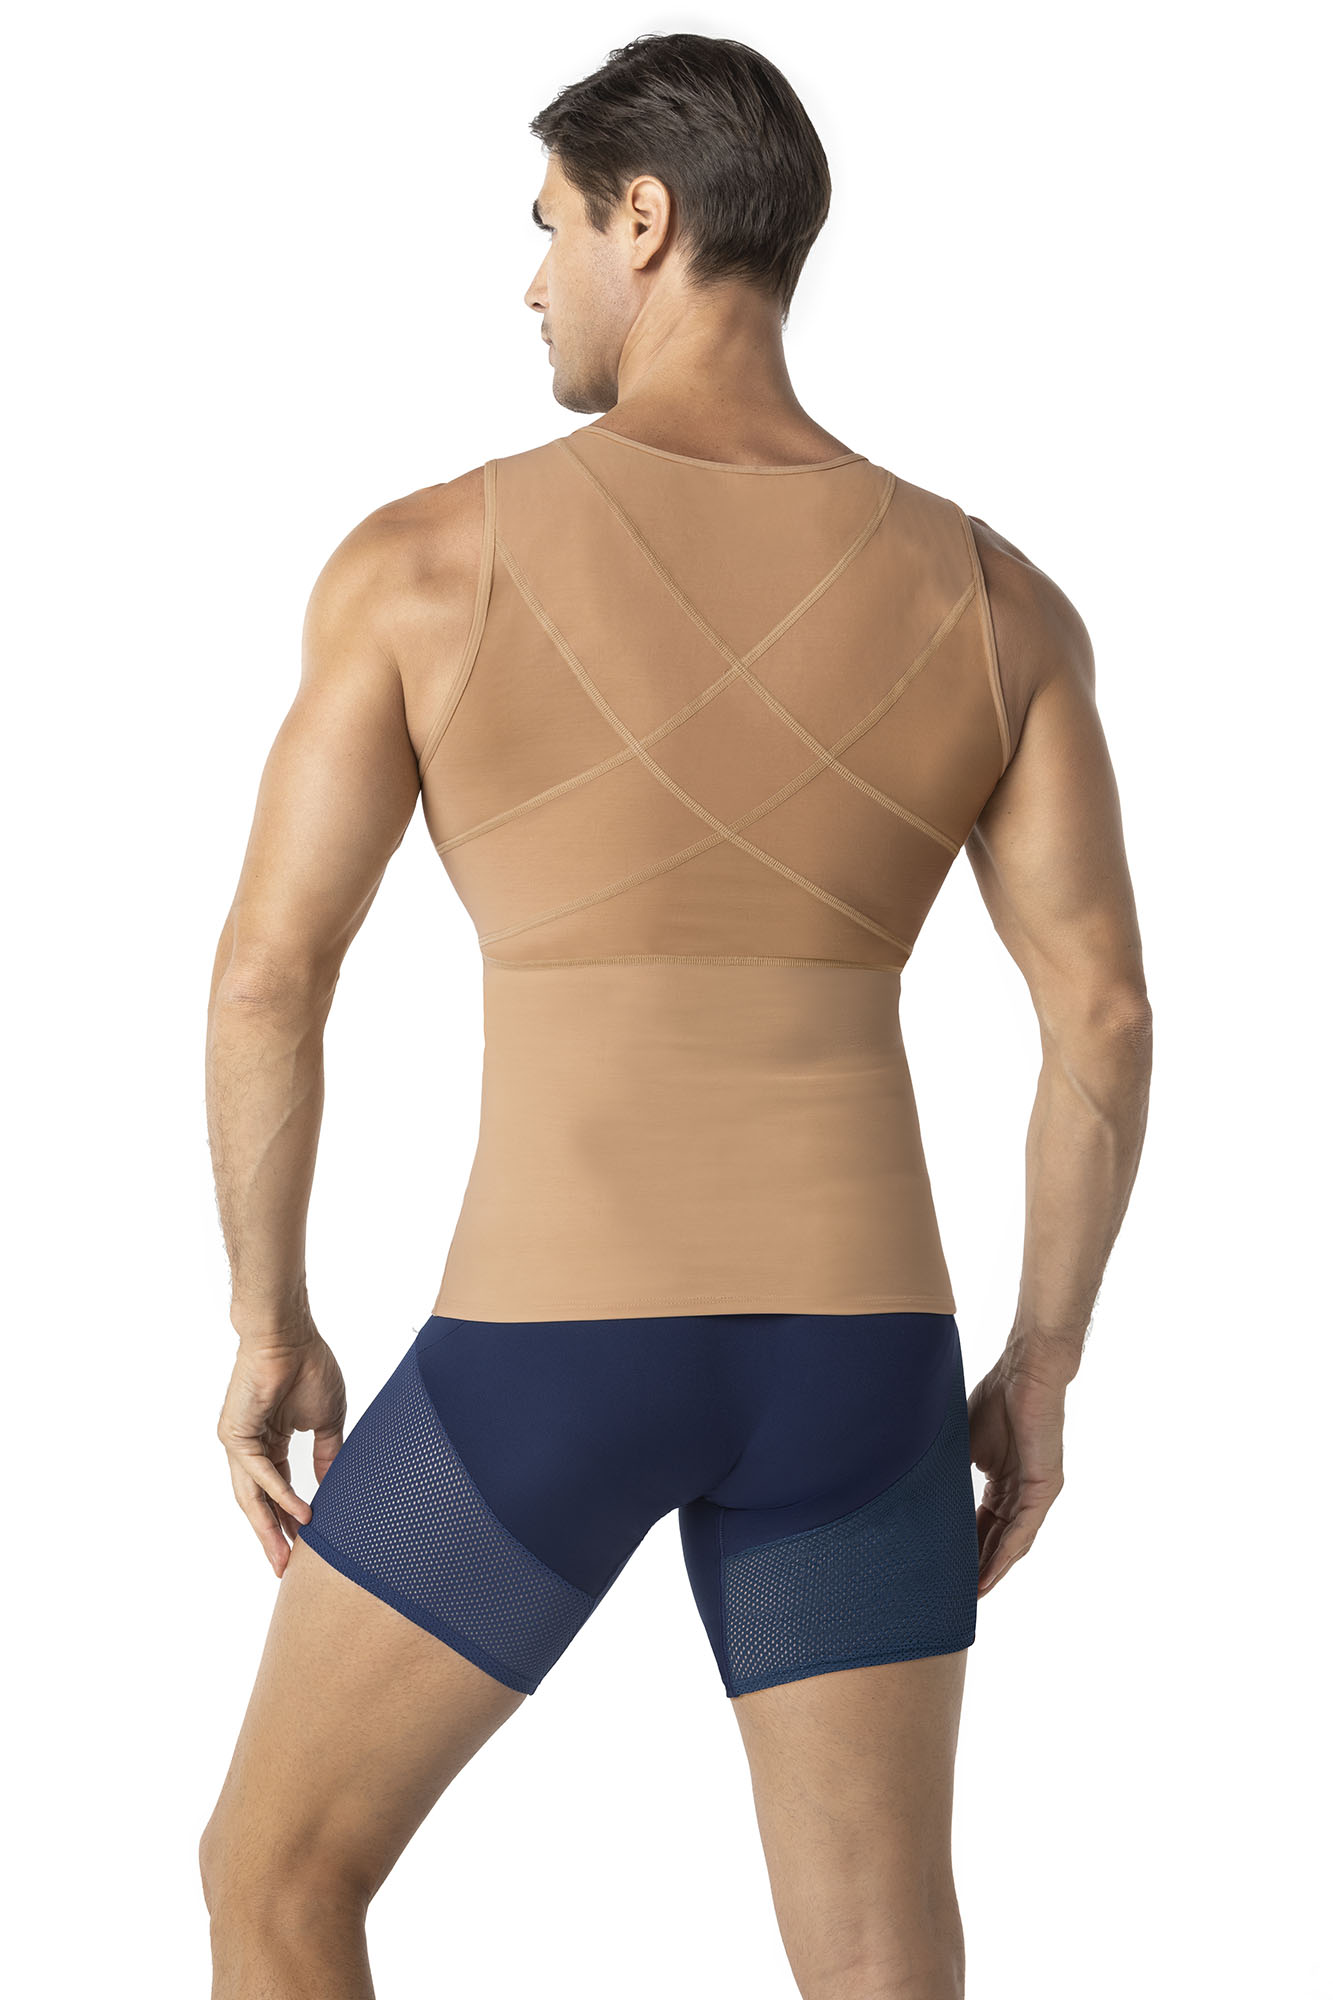 Leonisa Men's Firm Body Shaper Vest with Back Support - Max/Force